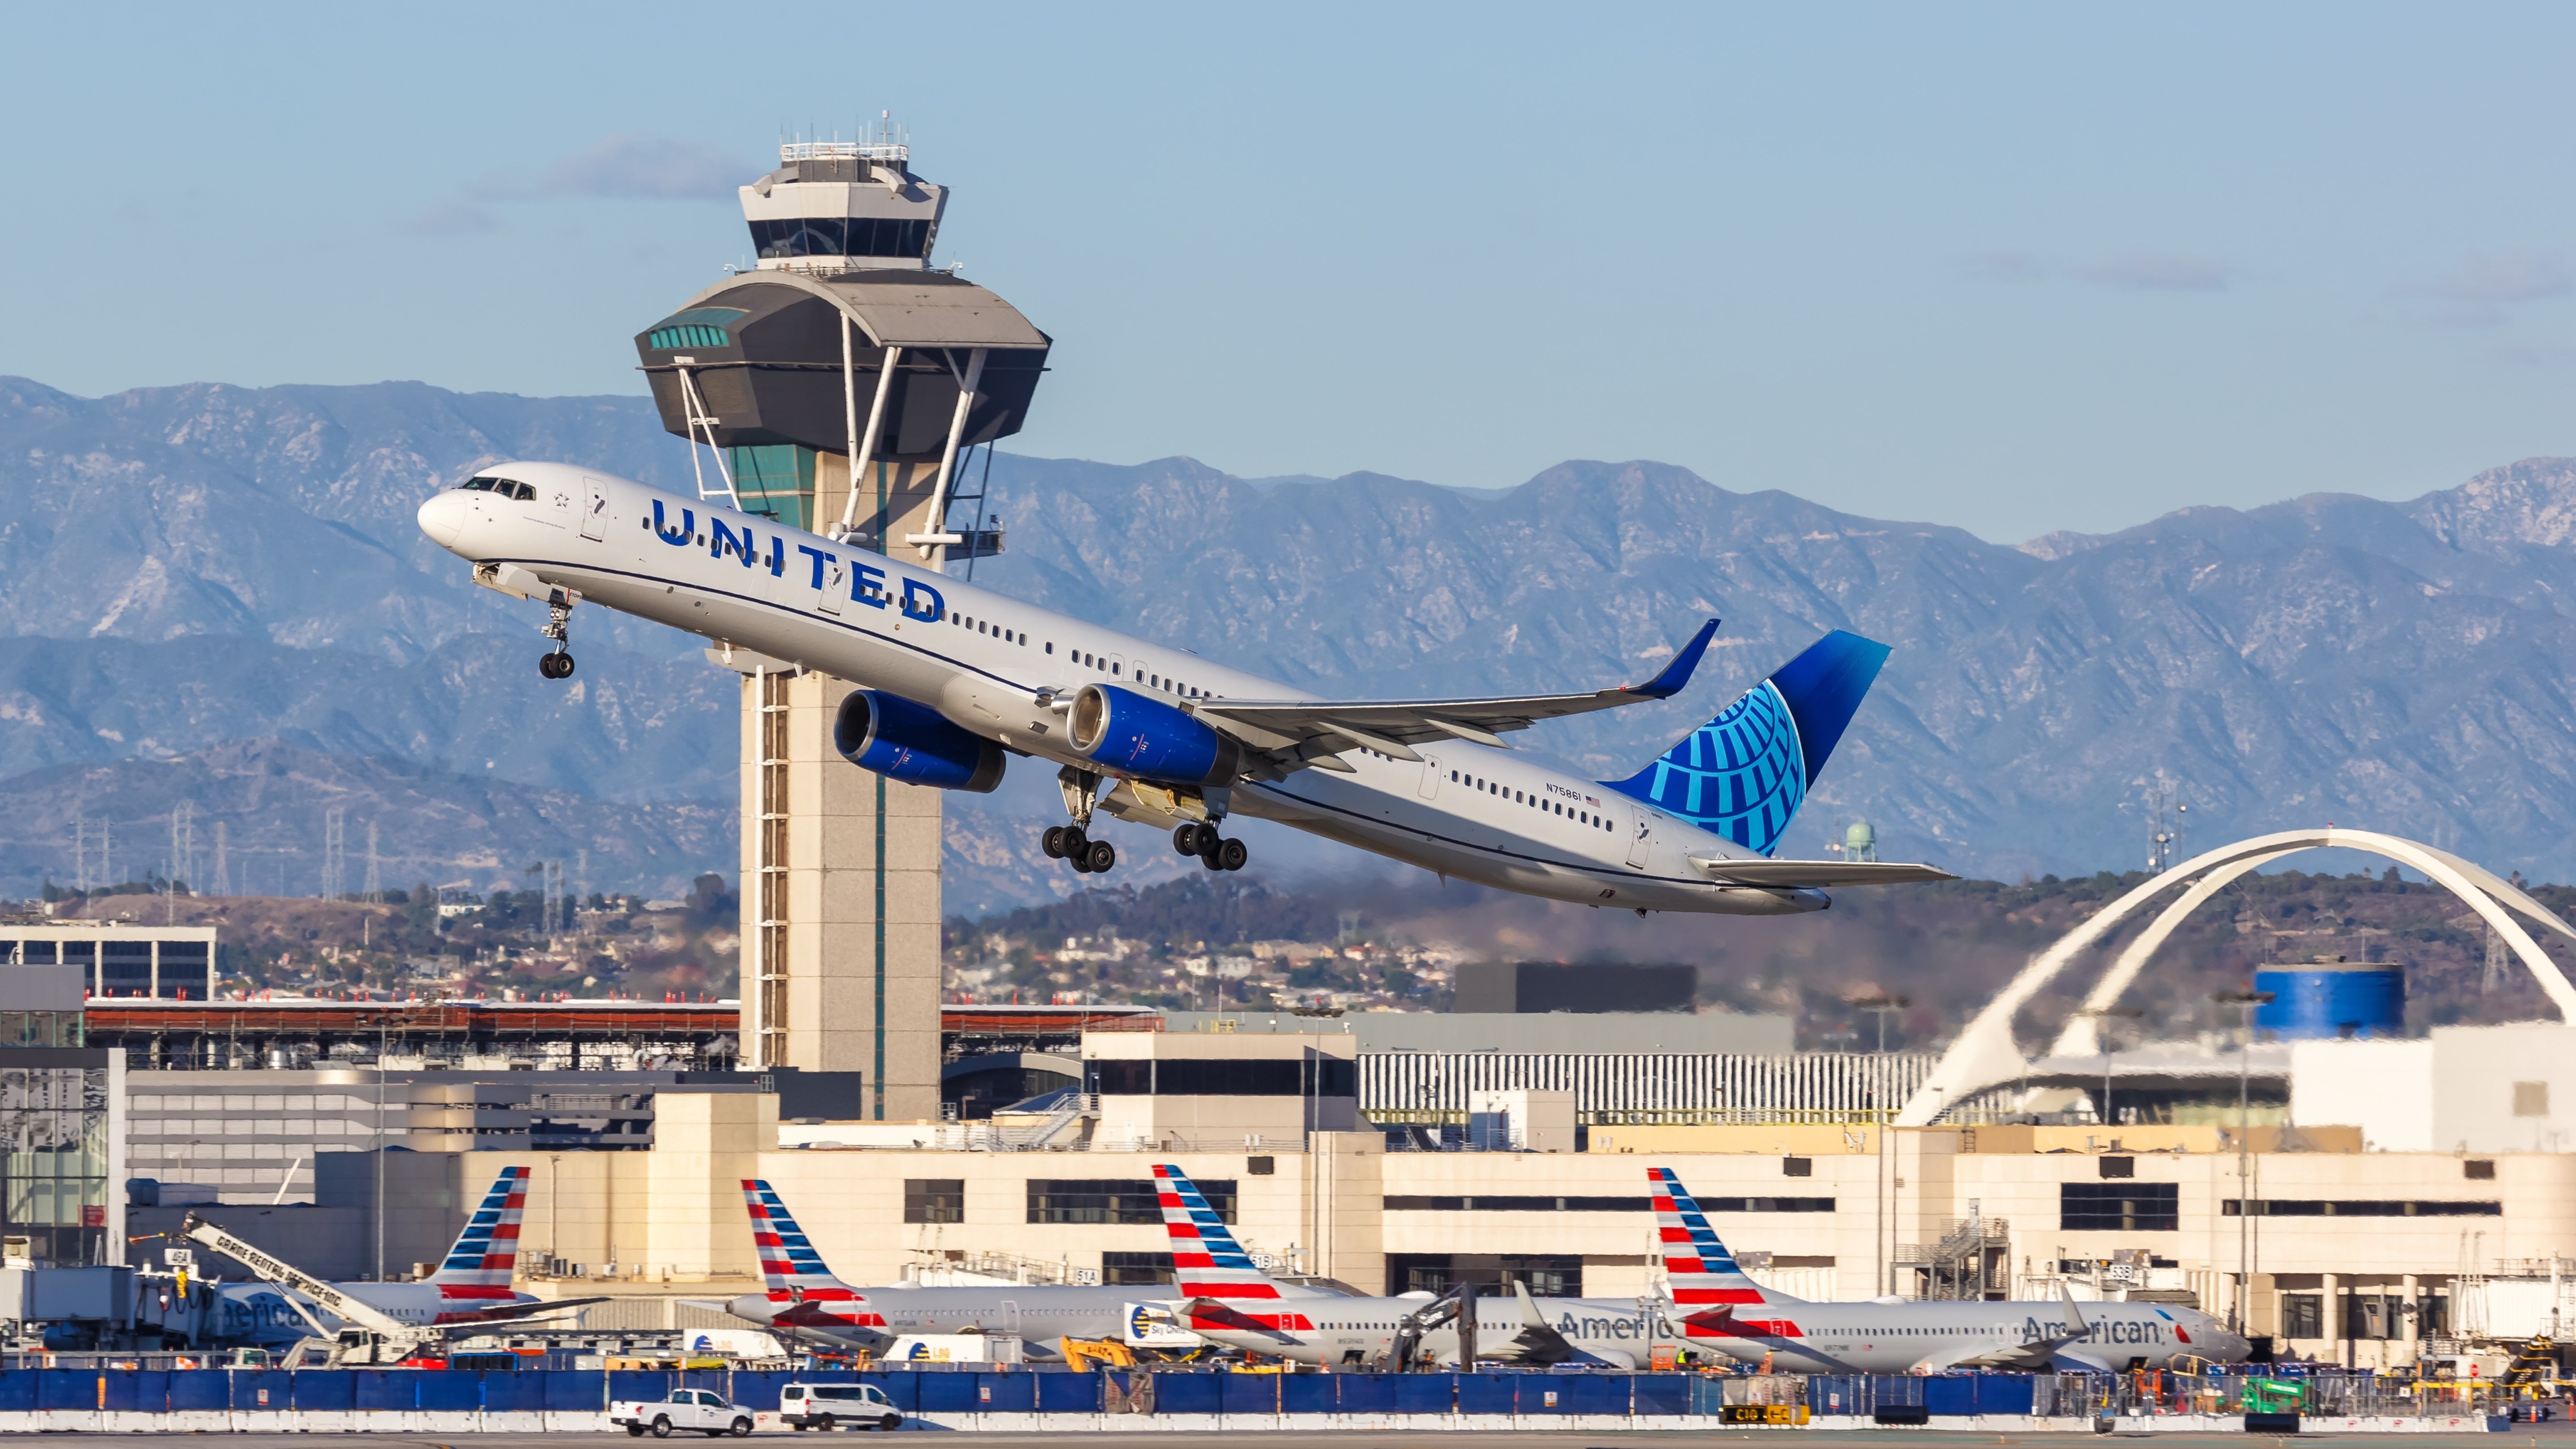 A United Airlines Boeing 757-300 Departing From Los Angeles International Airport.